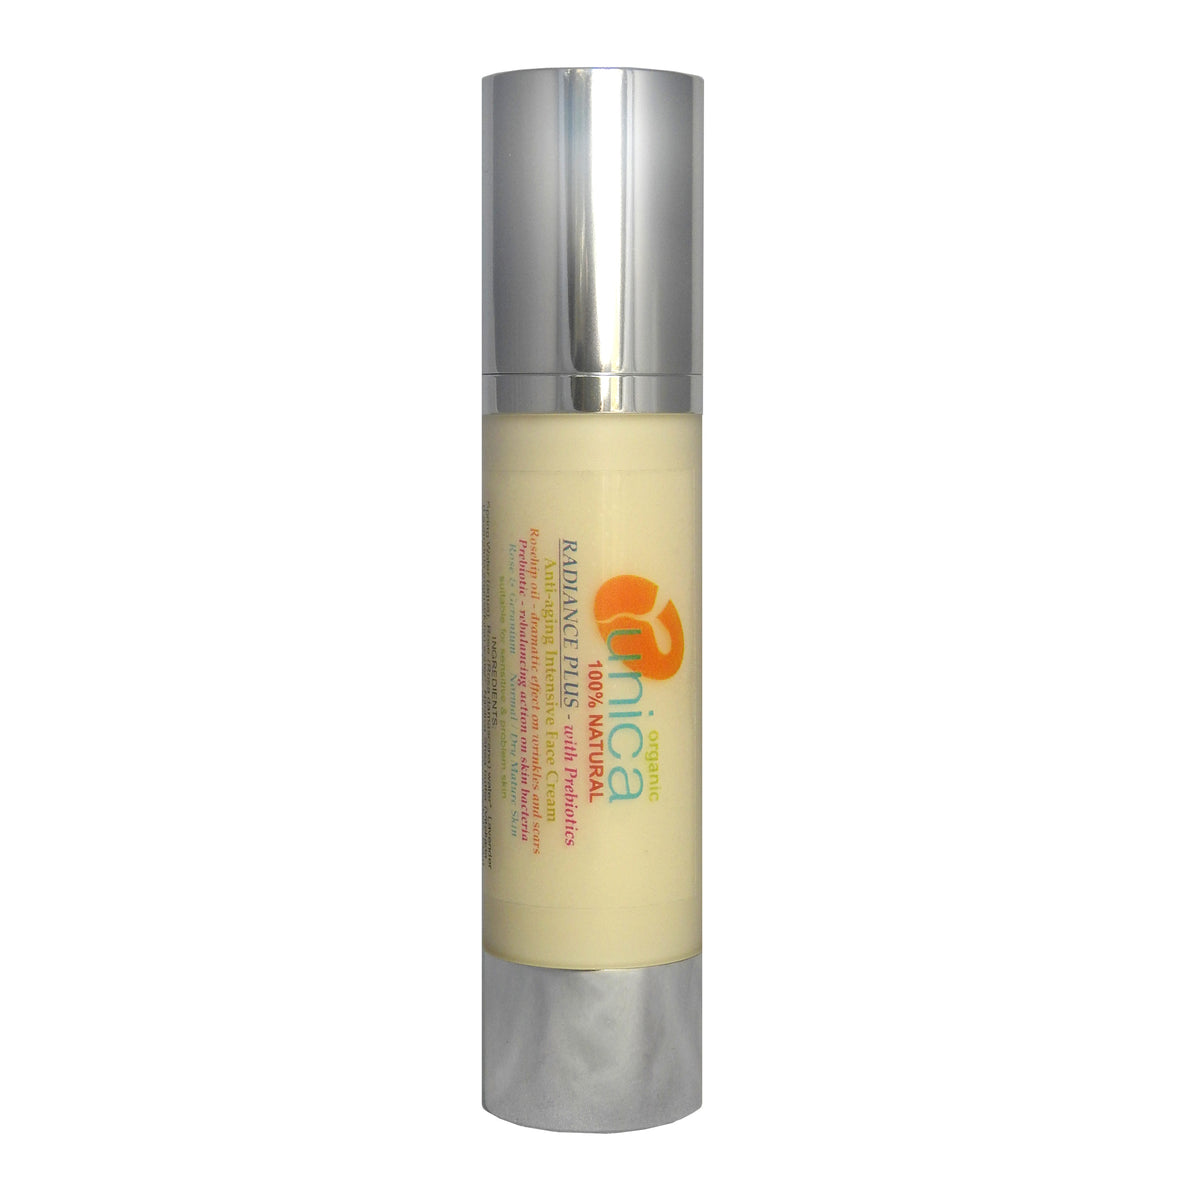 Organic face cream with Prebiotics for normal to dry skin in airless tube. Suitable for sensitive skin eczema, psoriasis. 